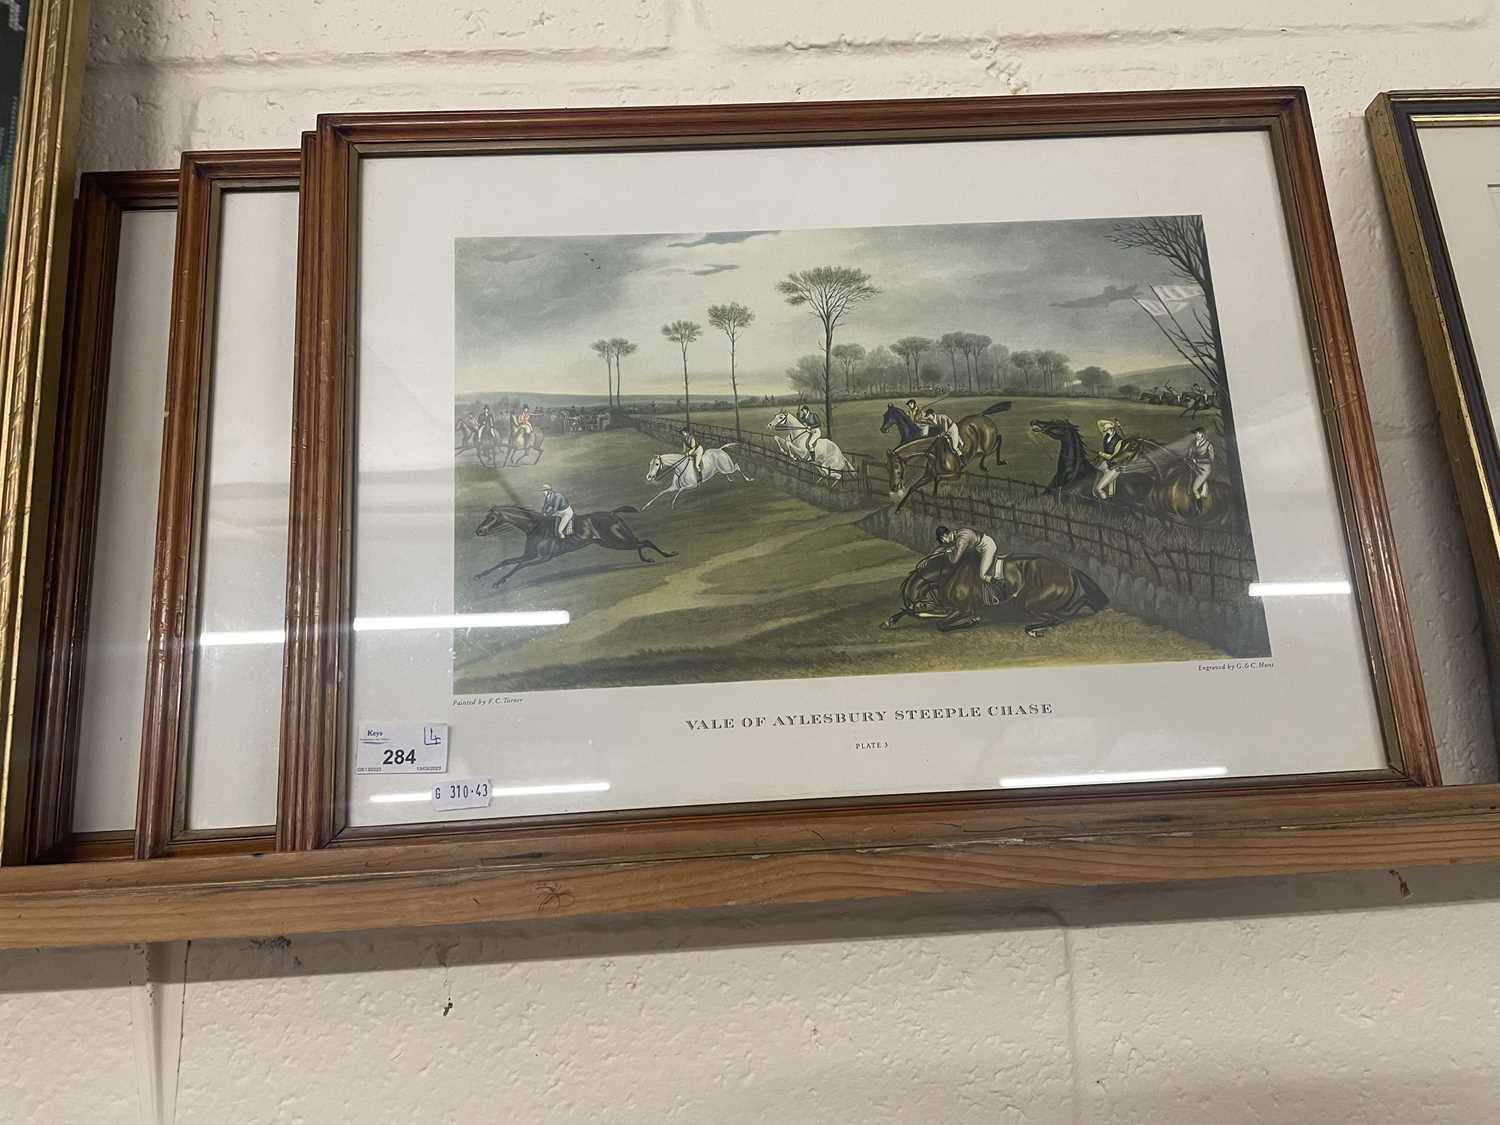 Four reproduction prints of the Vale of Asbury Steeplechase, engraved by G & C Hunt, framed and